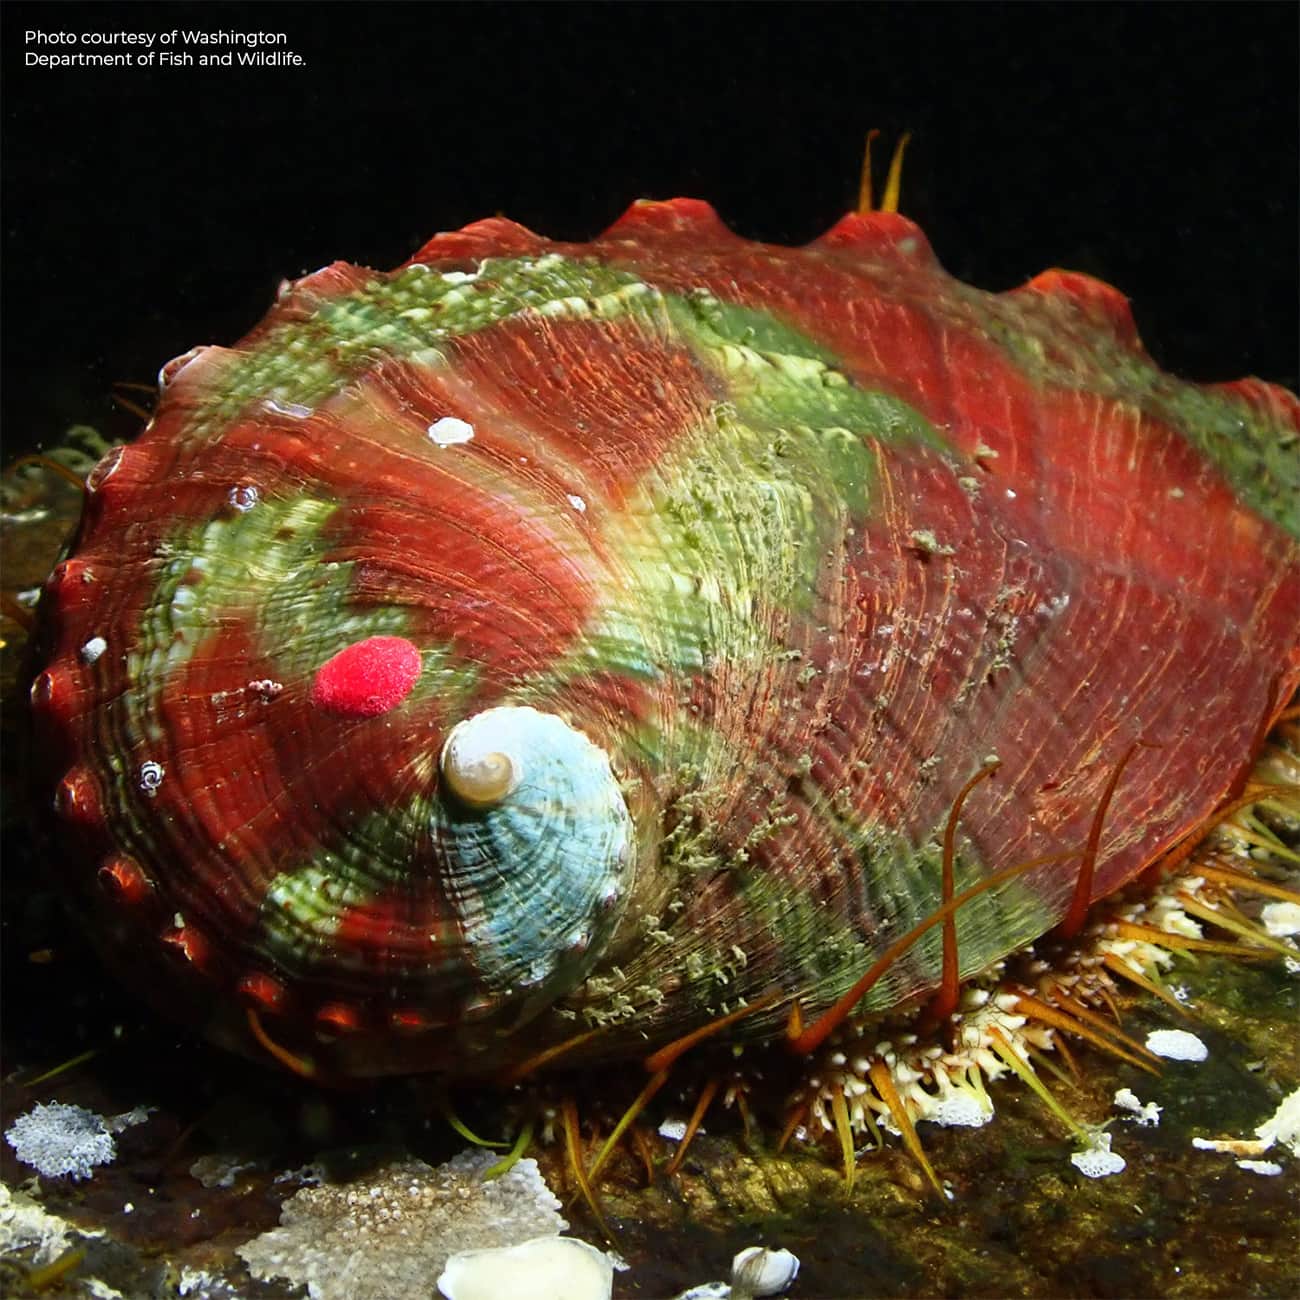 Photo of an adult pinto abalone, photo courtesy of Washington Department of Fish and Wildlife